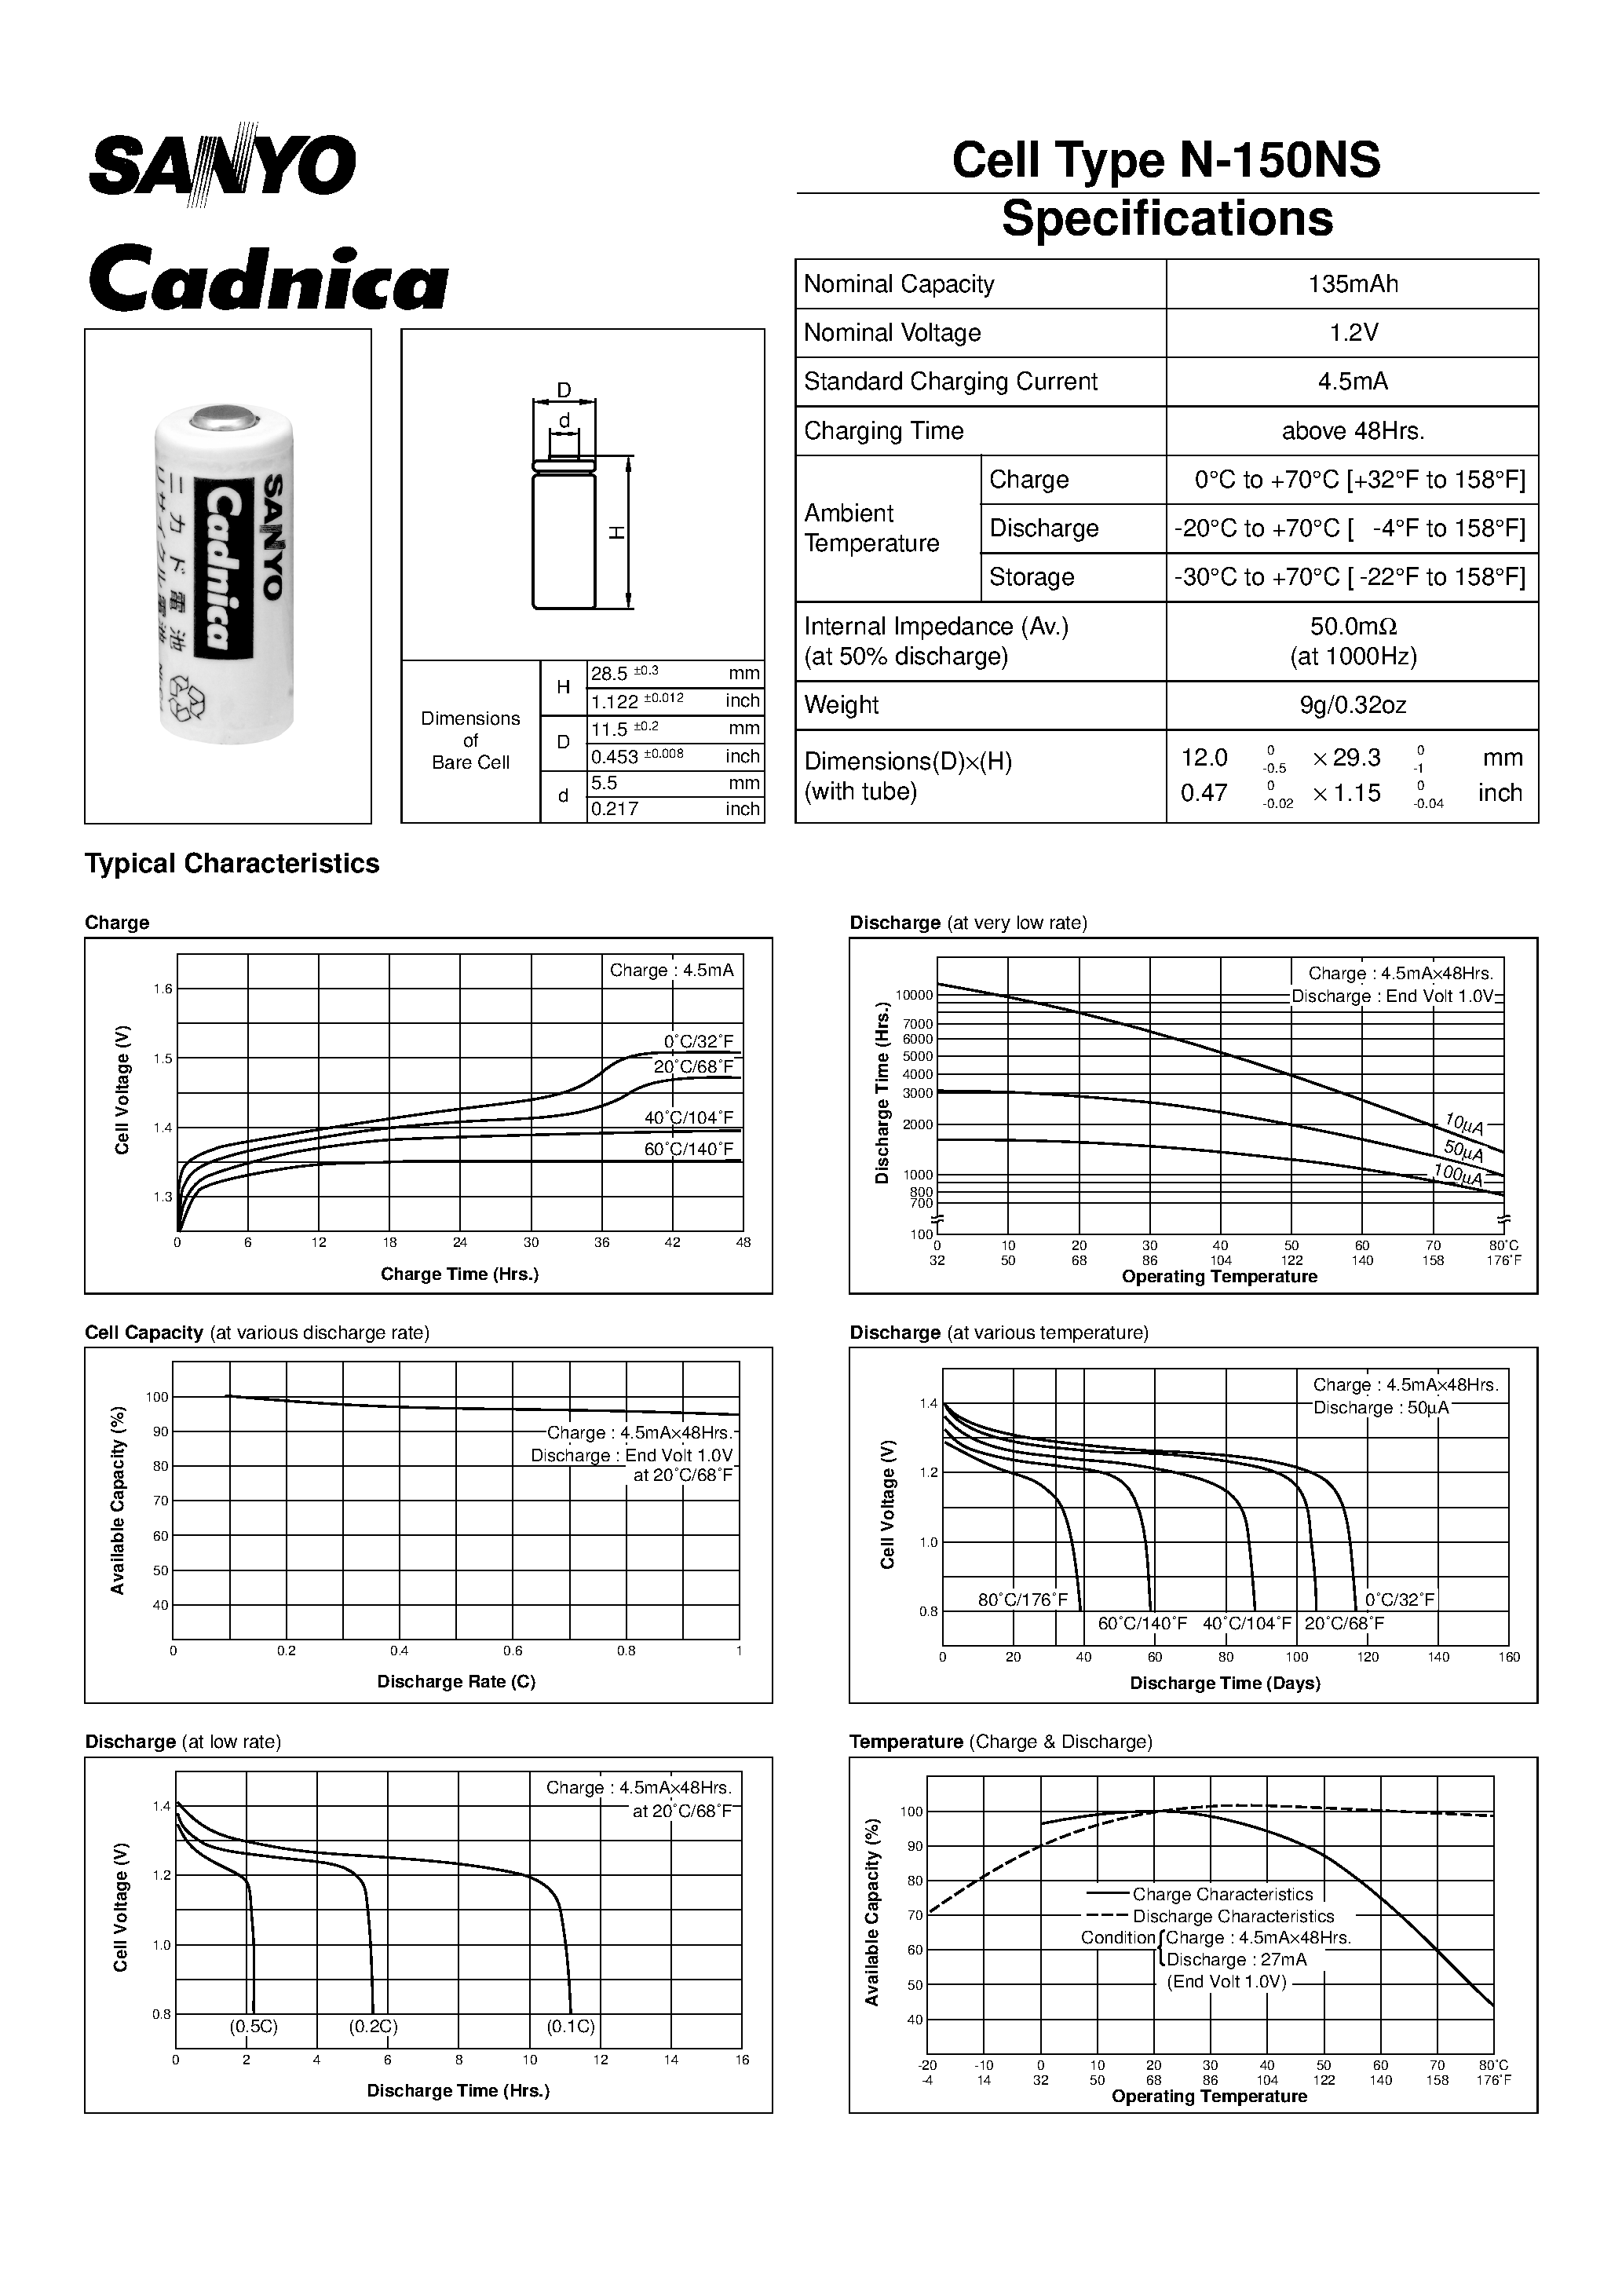 Datasheet N-150NS - Cell Type N-150NS page 1